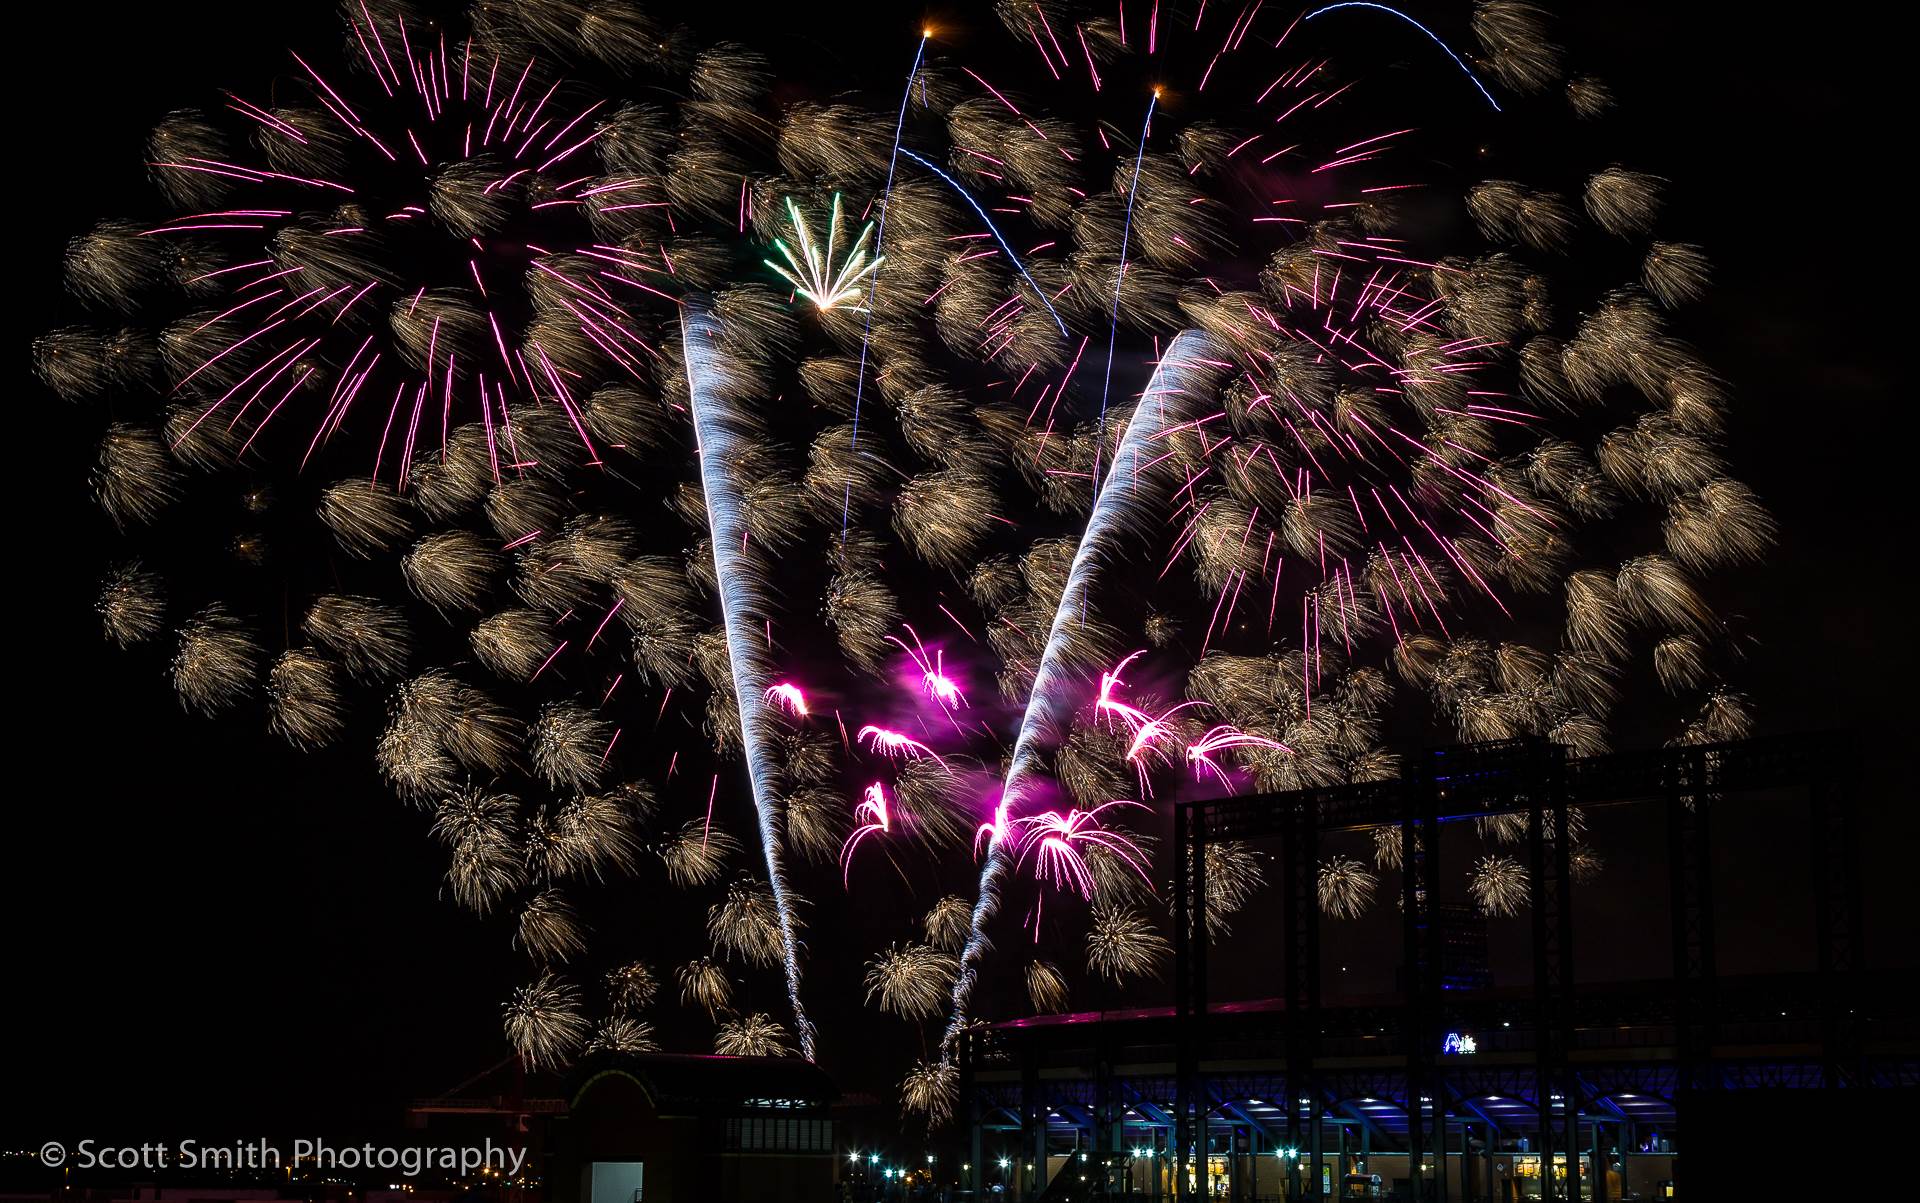 Fireworks over Coors Field 4 - Fourth of July fireworks over Coors Field after a Colorado Rockies game. by Scott Smith Photos